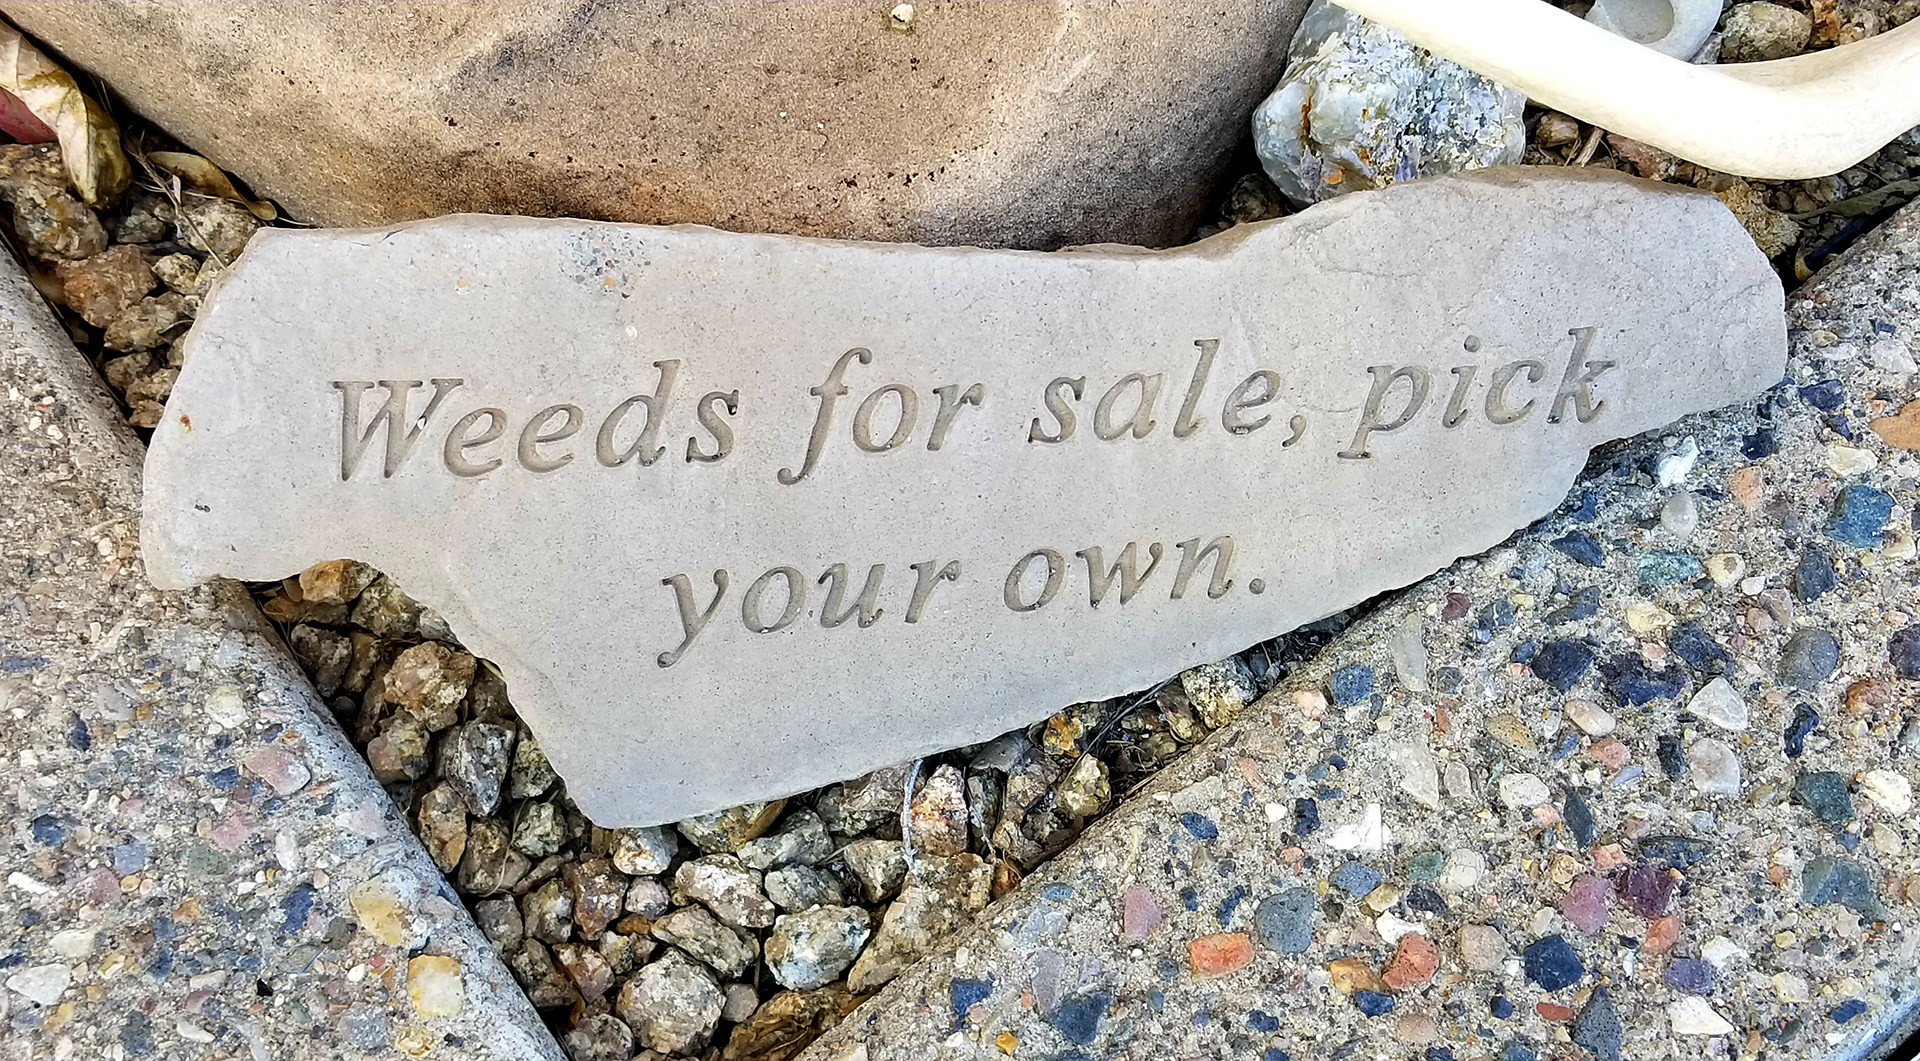 rock that has "weeds for sale, pick your own" engraved on it in landscaping